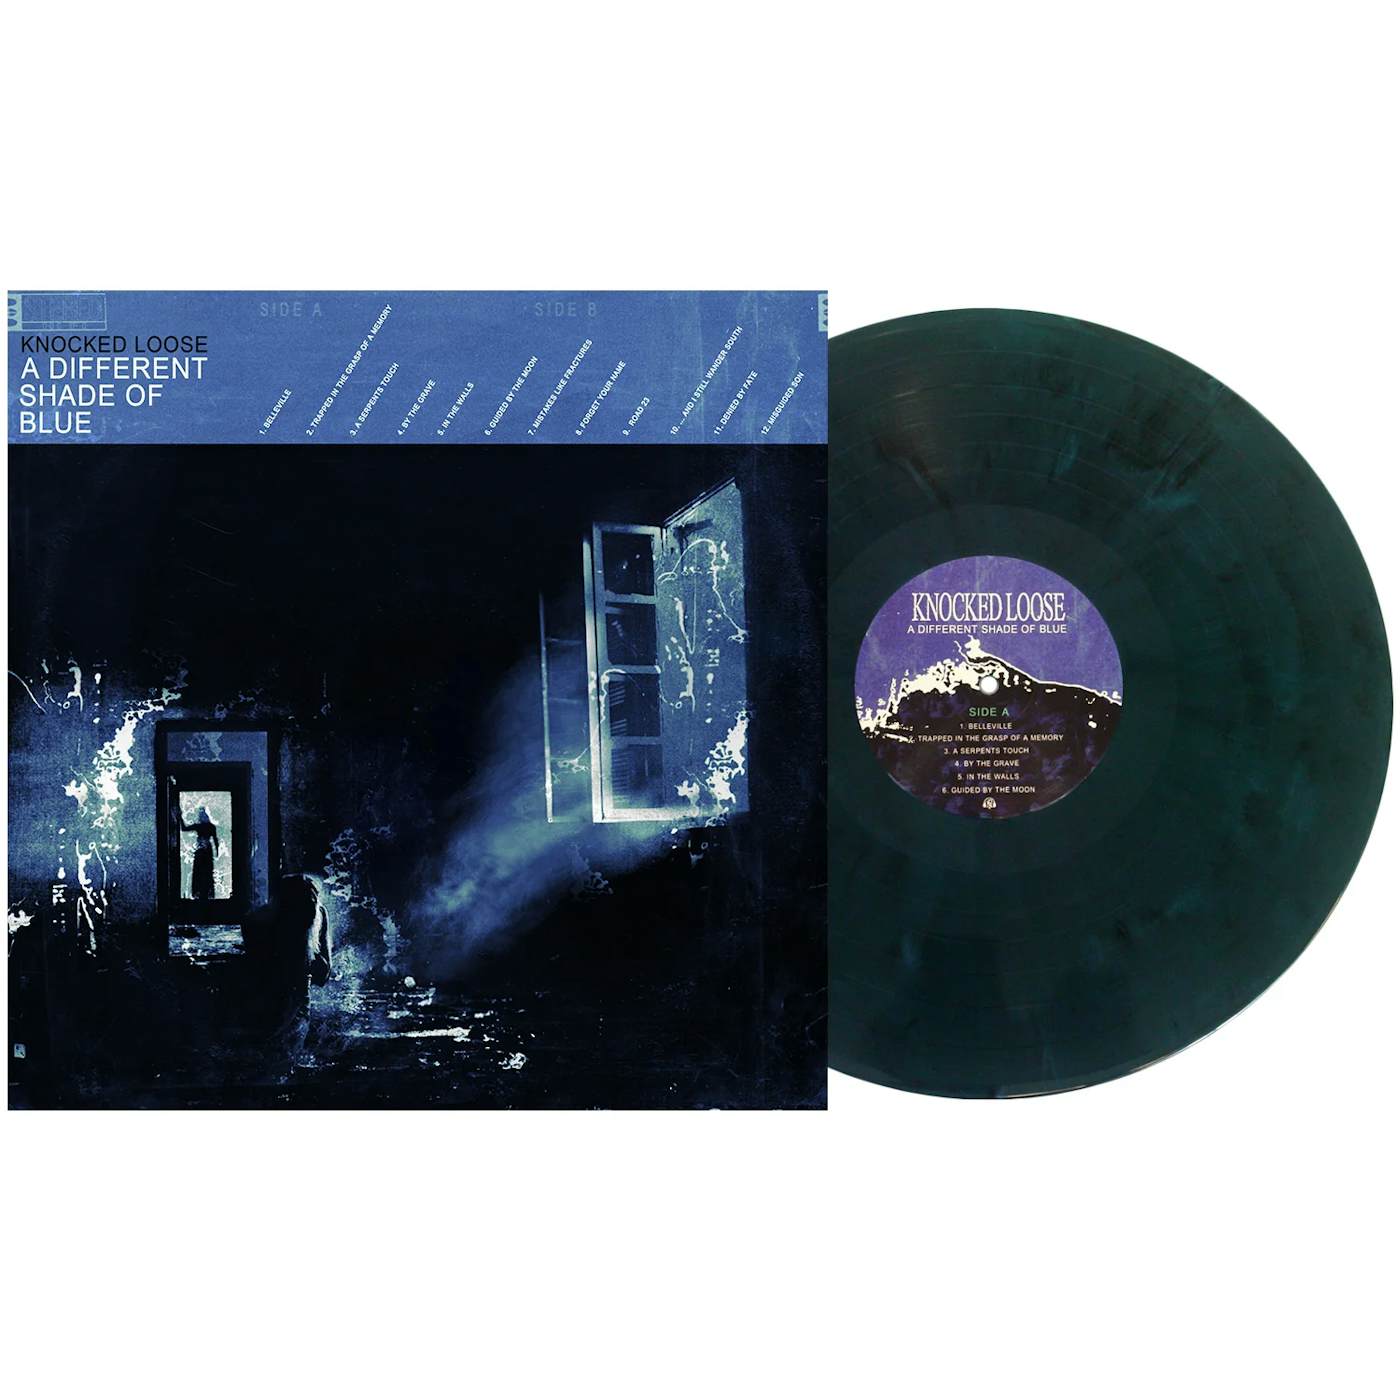 Knocked Loose A Different Shade Of Blue 12" Vinyl (Black & Blue Galaxy)